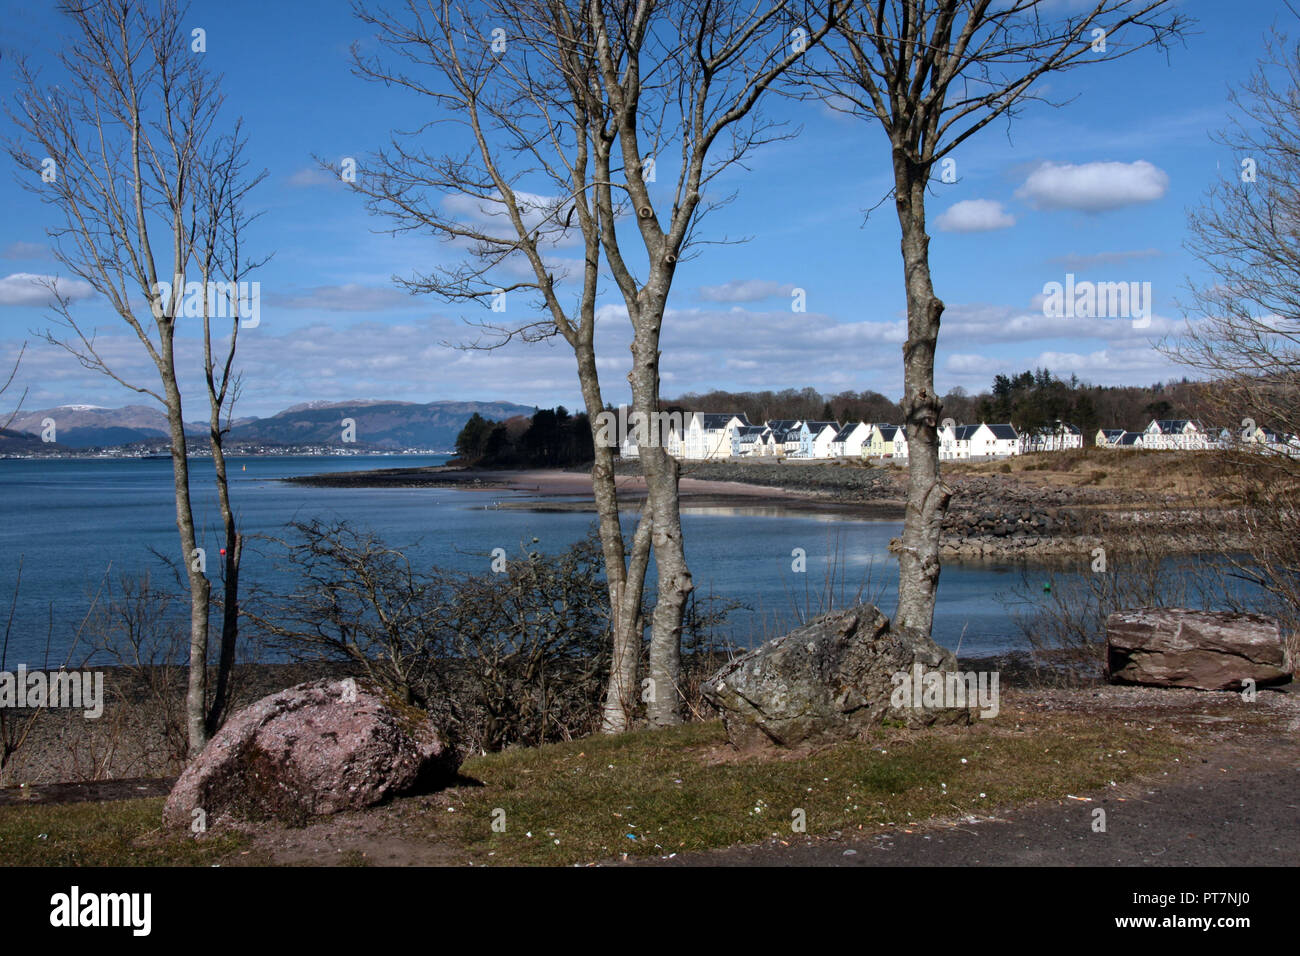 The small village of Inverkip seen here, from across the bay, with its marina on the right, is a popular haven for boating enthusiasts on the Firth of Clyde in Scotland. Stock Photo